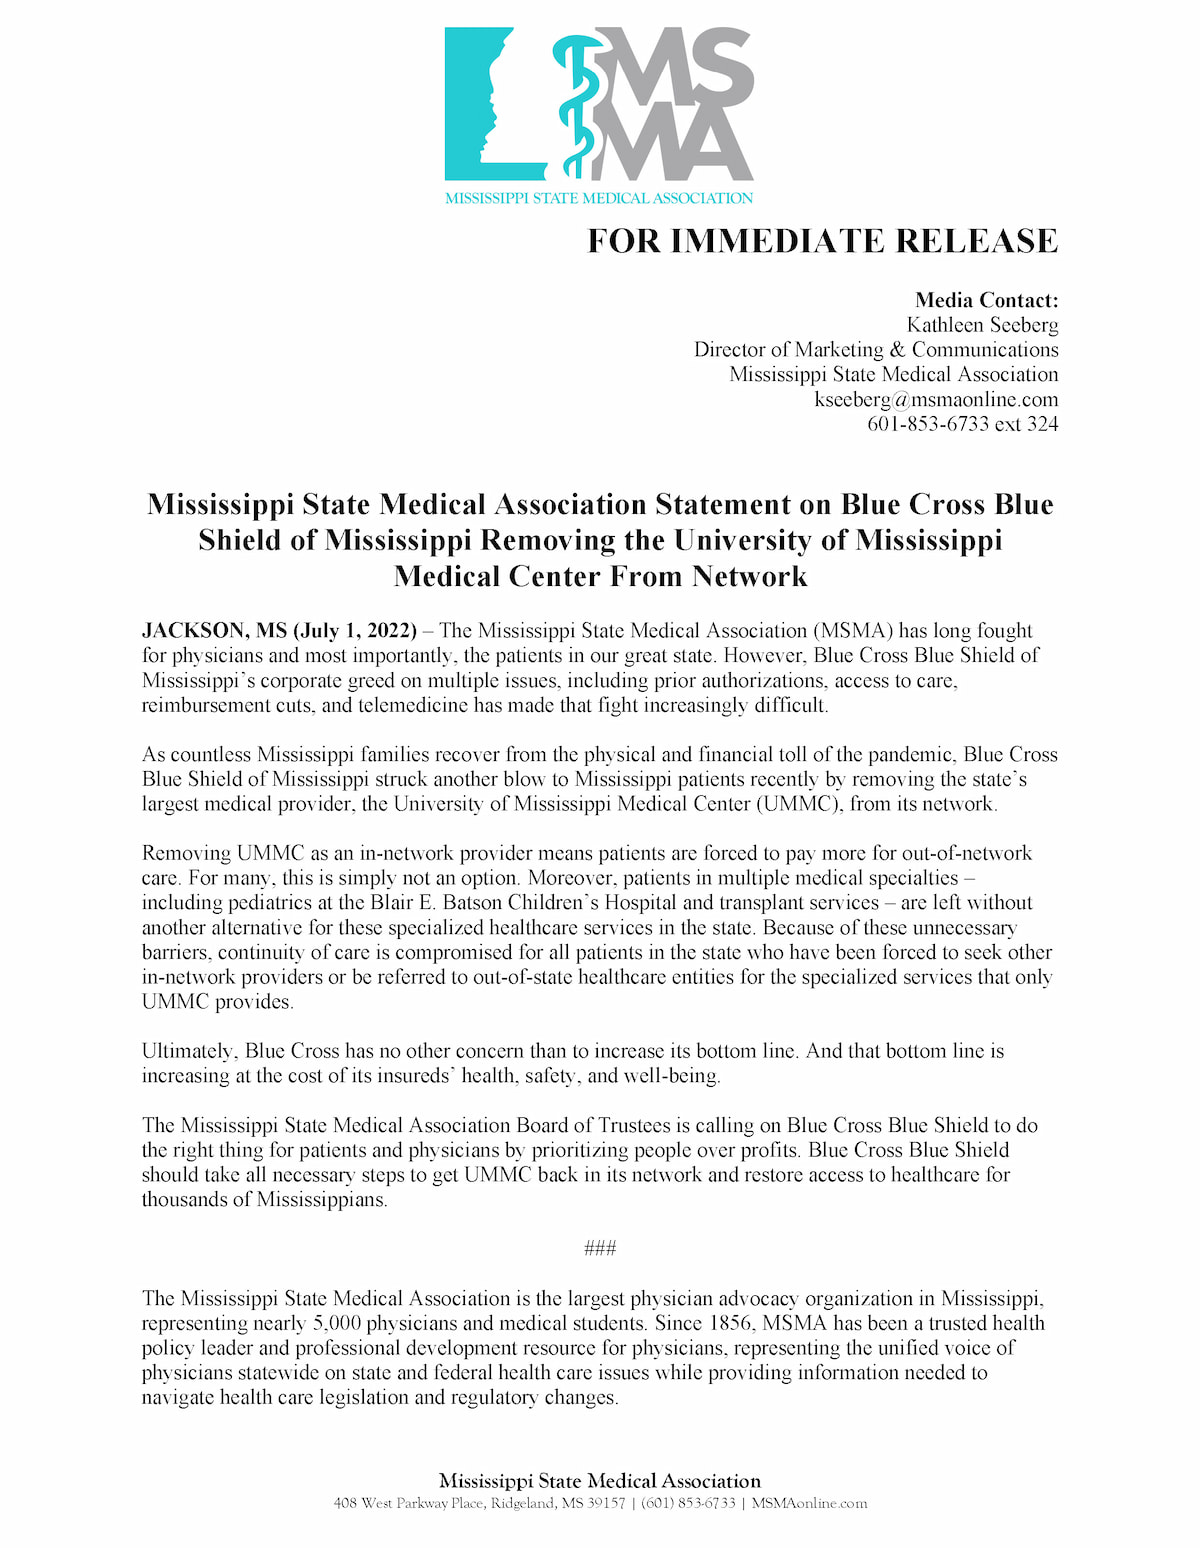 FOR IMMEDIATE RELEASE Media Contact: Kathleen Seeberg Director of Marketing & Communications Mississippi State Medical Association kseeberg@msmaonline.com 601-853-6733 ext 324 Mississippi State Medical Association Statement on Blue Cross Blue Shield of Mississippi Removing the University of Mississippi Medical Center From Network JACKSON, MS (July 1, 2022) – The Mississippi State Medical Association (MSMA) has long fought for physicians and most importantly, the patients in our great state. However, Blue Cross Blue Shield of Mississippi’s corporate greed on multiple issues, including prior authorizations, access to care, reimbursement cuts, and telemedicine has made that fight increasingly difficult. As countless Mississippi families recover from the physical and financial toll of the pandemic, Blue Cross Blue Shield of Mississippi struck another blow to Mississippi patients recently by removing the state’s largest medical provider, the University of Mississippi Medical Center (UMMC), from its network. Removing UMMC as an in-network provider means patients are forced to pay more for out-of-network care. For many, this is simply not an option. Moreover, patients in multiple medical specialties – including pediatrics at the Blair E. Batson Children’s Hospital and transplant services – are left without another alternative for these specialized healthcare services in the state. Because of these unnecessary barriers, continuity of care is compromised for all patients in the state who have been forced to seek other in-network providers or be referred to out-of-state healthcare entities for the specialized services that only UMMC provides.  Ultimately, Blue Cross has no other concern than to increase its bottom line. And that bottom line is increasing at the cost of its insureds’ health, safety, and well-being. The Mississippi State Medical Association Board of Trustees is calling on Blue Cross Blue Shield to do the right thing for patients and physicians by prioritizing people over profits. Blue Cross Blue Shield should take all necessary steps to get UMMC back in its network and restore access to healthcare for thousands of Mississippians.